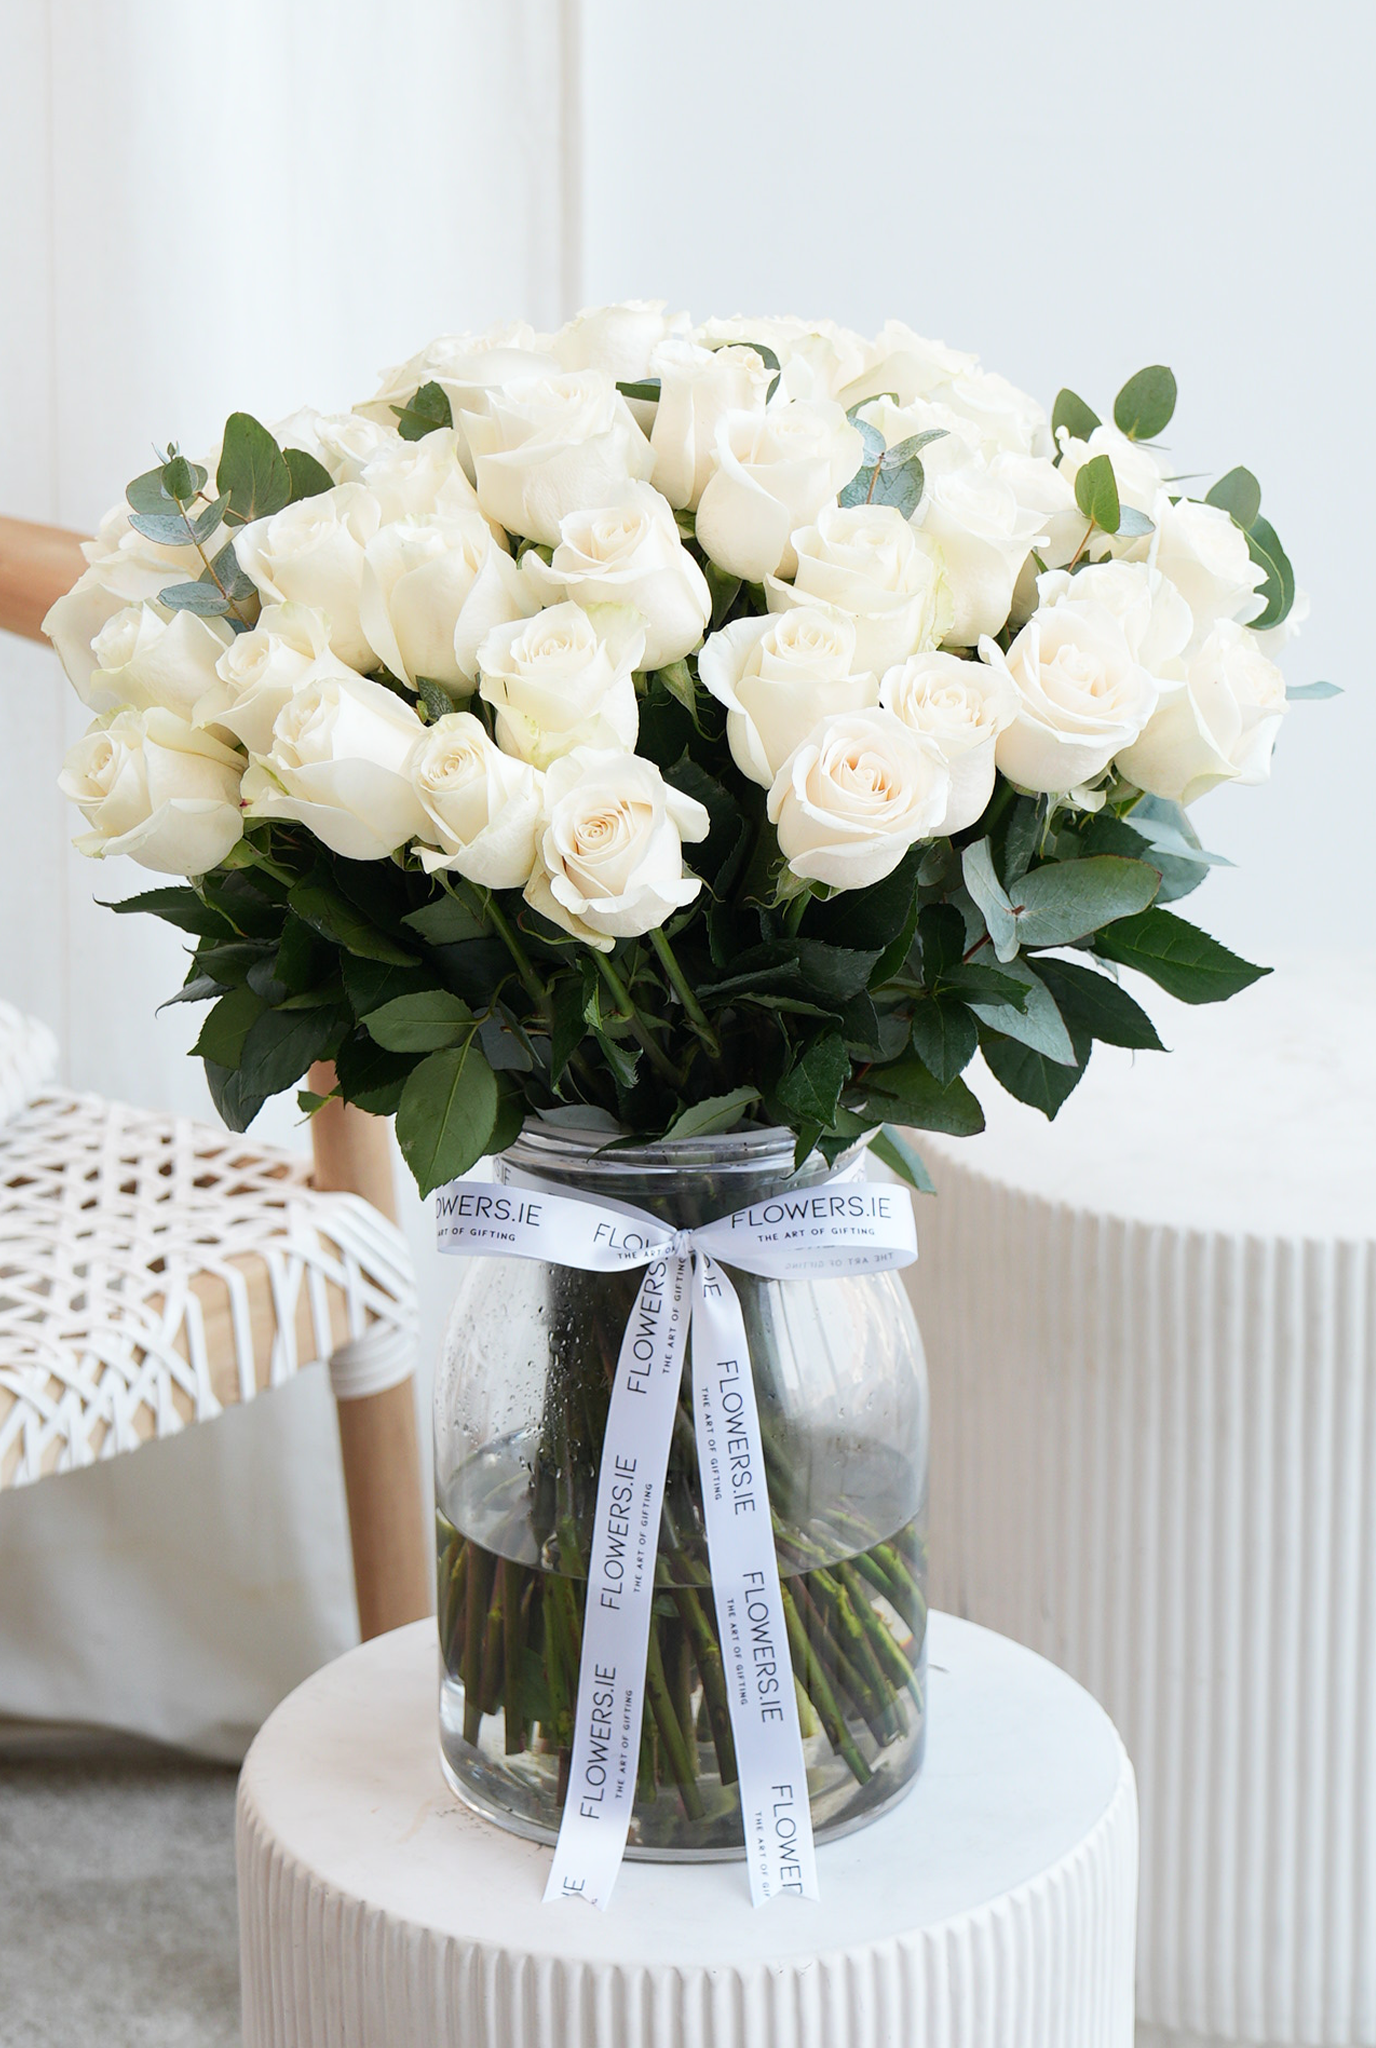 50 Long Stem White Roses - Vase | Delivery in Ireland – Flowers.ie